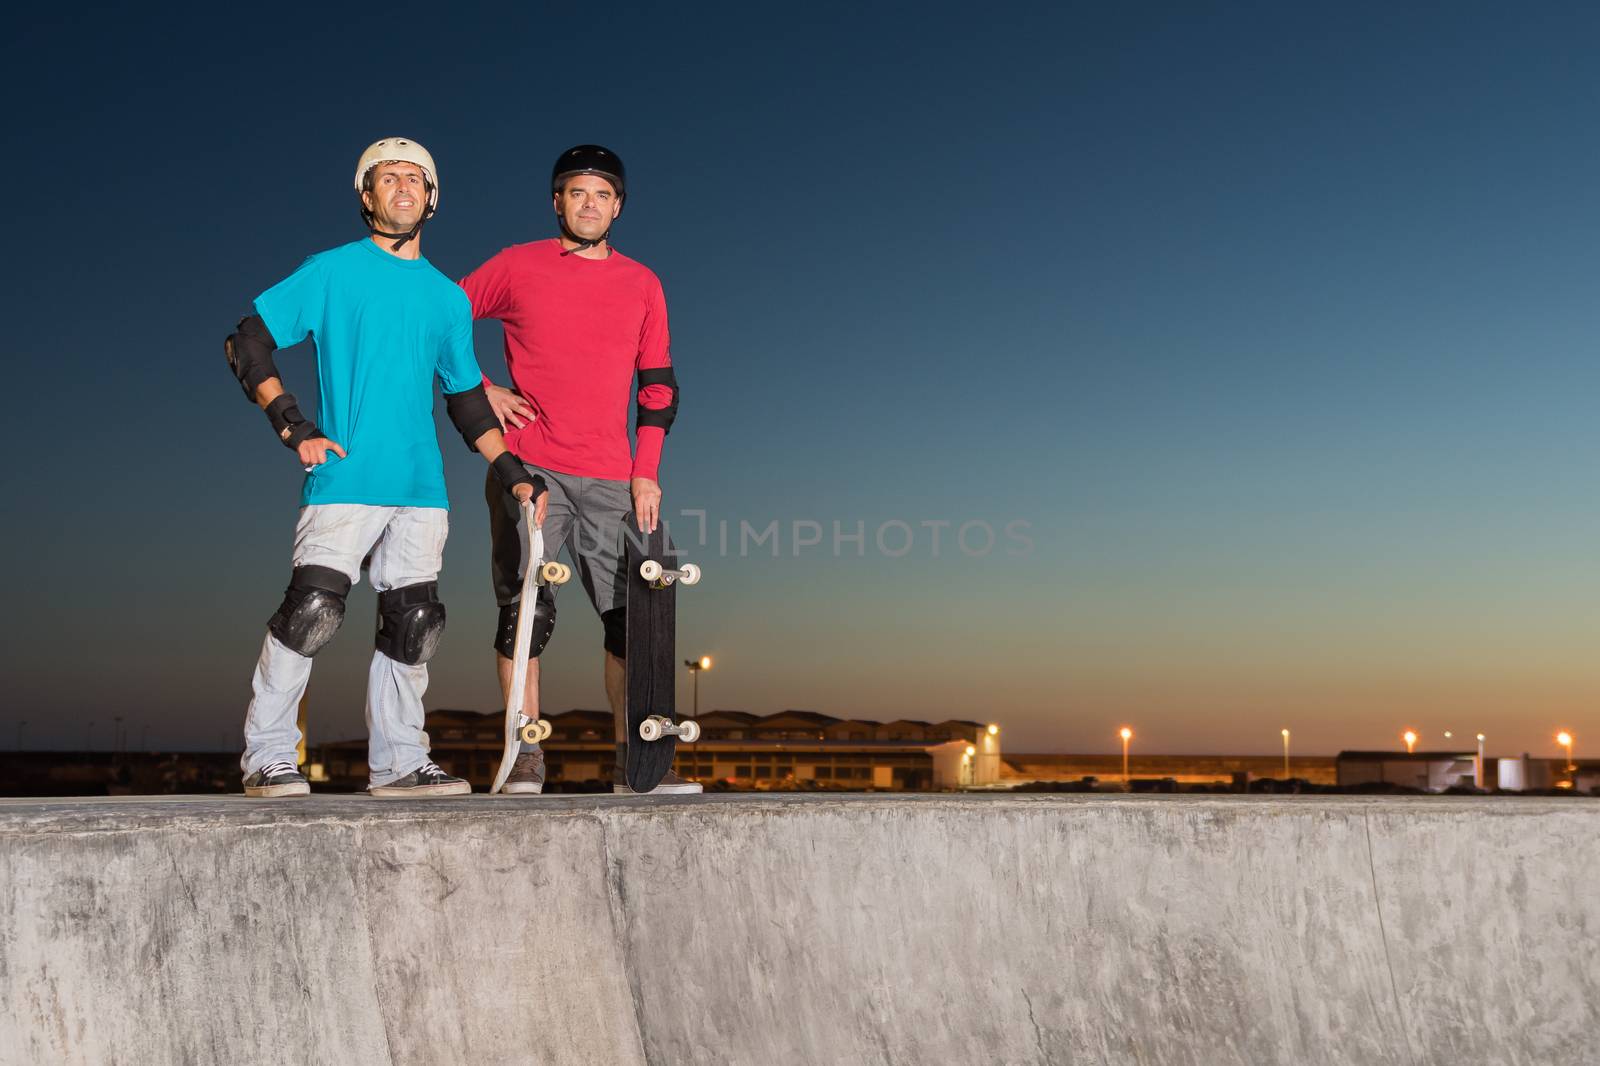 Two skateboarders standing near a concrete pool at skatepark on a beatiful sunset.